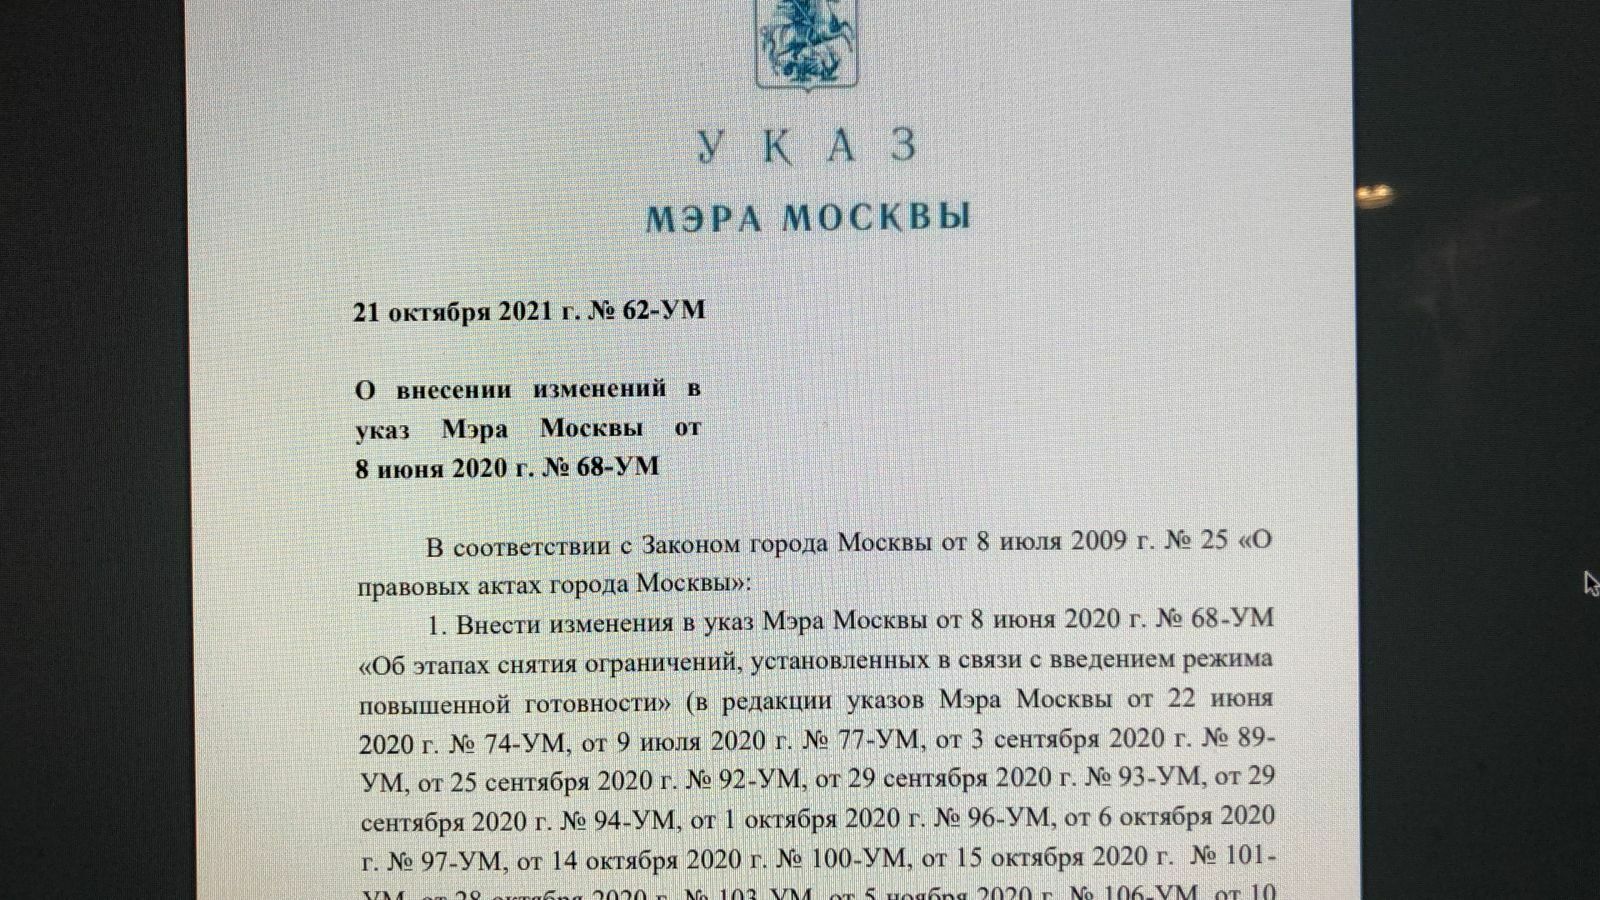 Moscow Mayor Sobyanin's decree on lockdown: we publish the main provisions and requirements